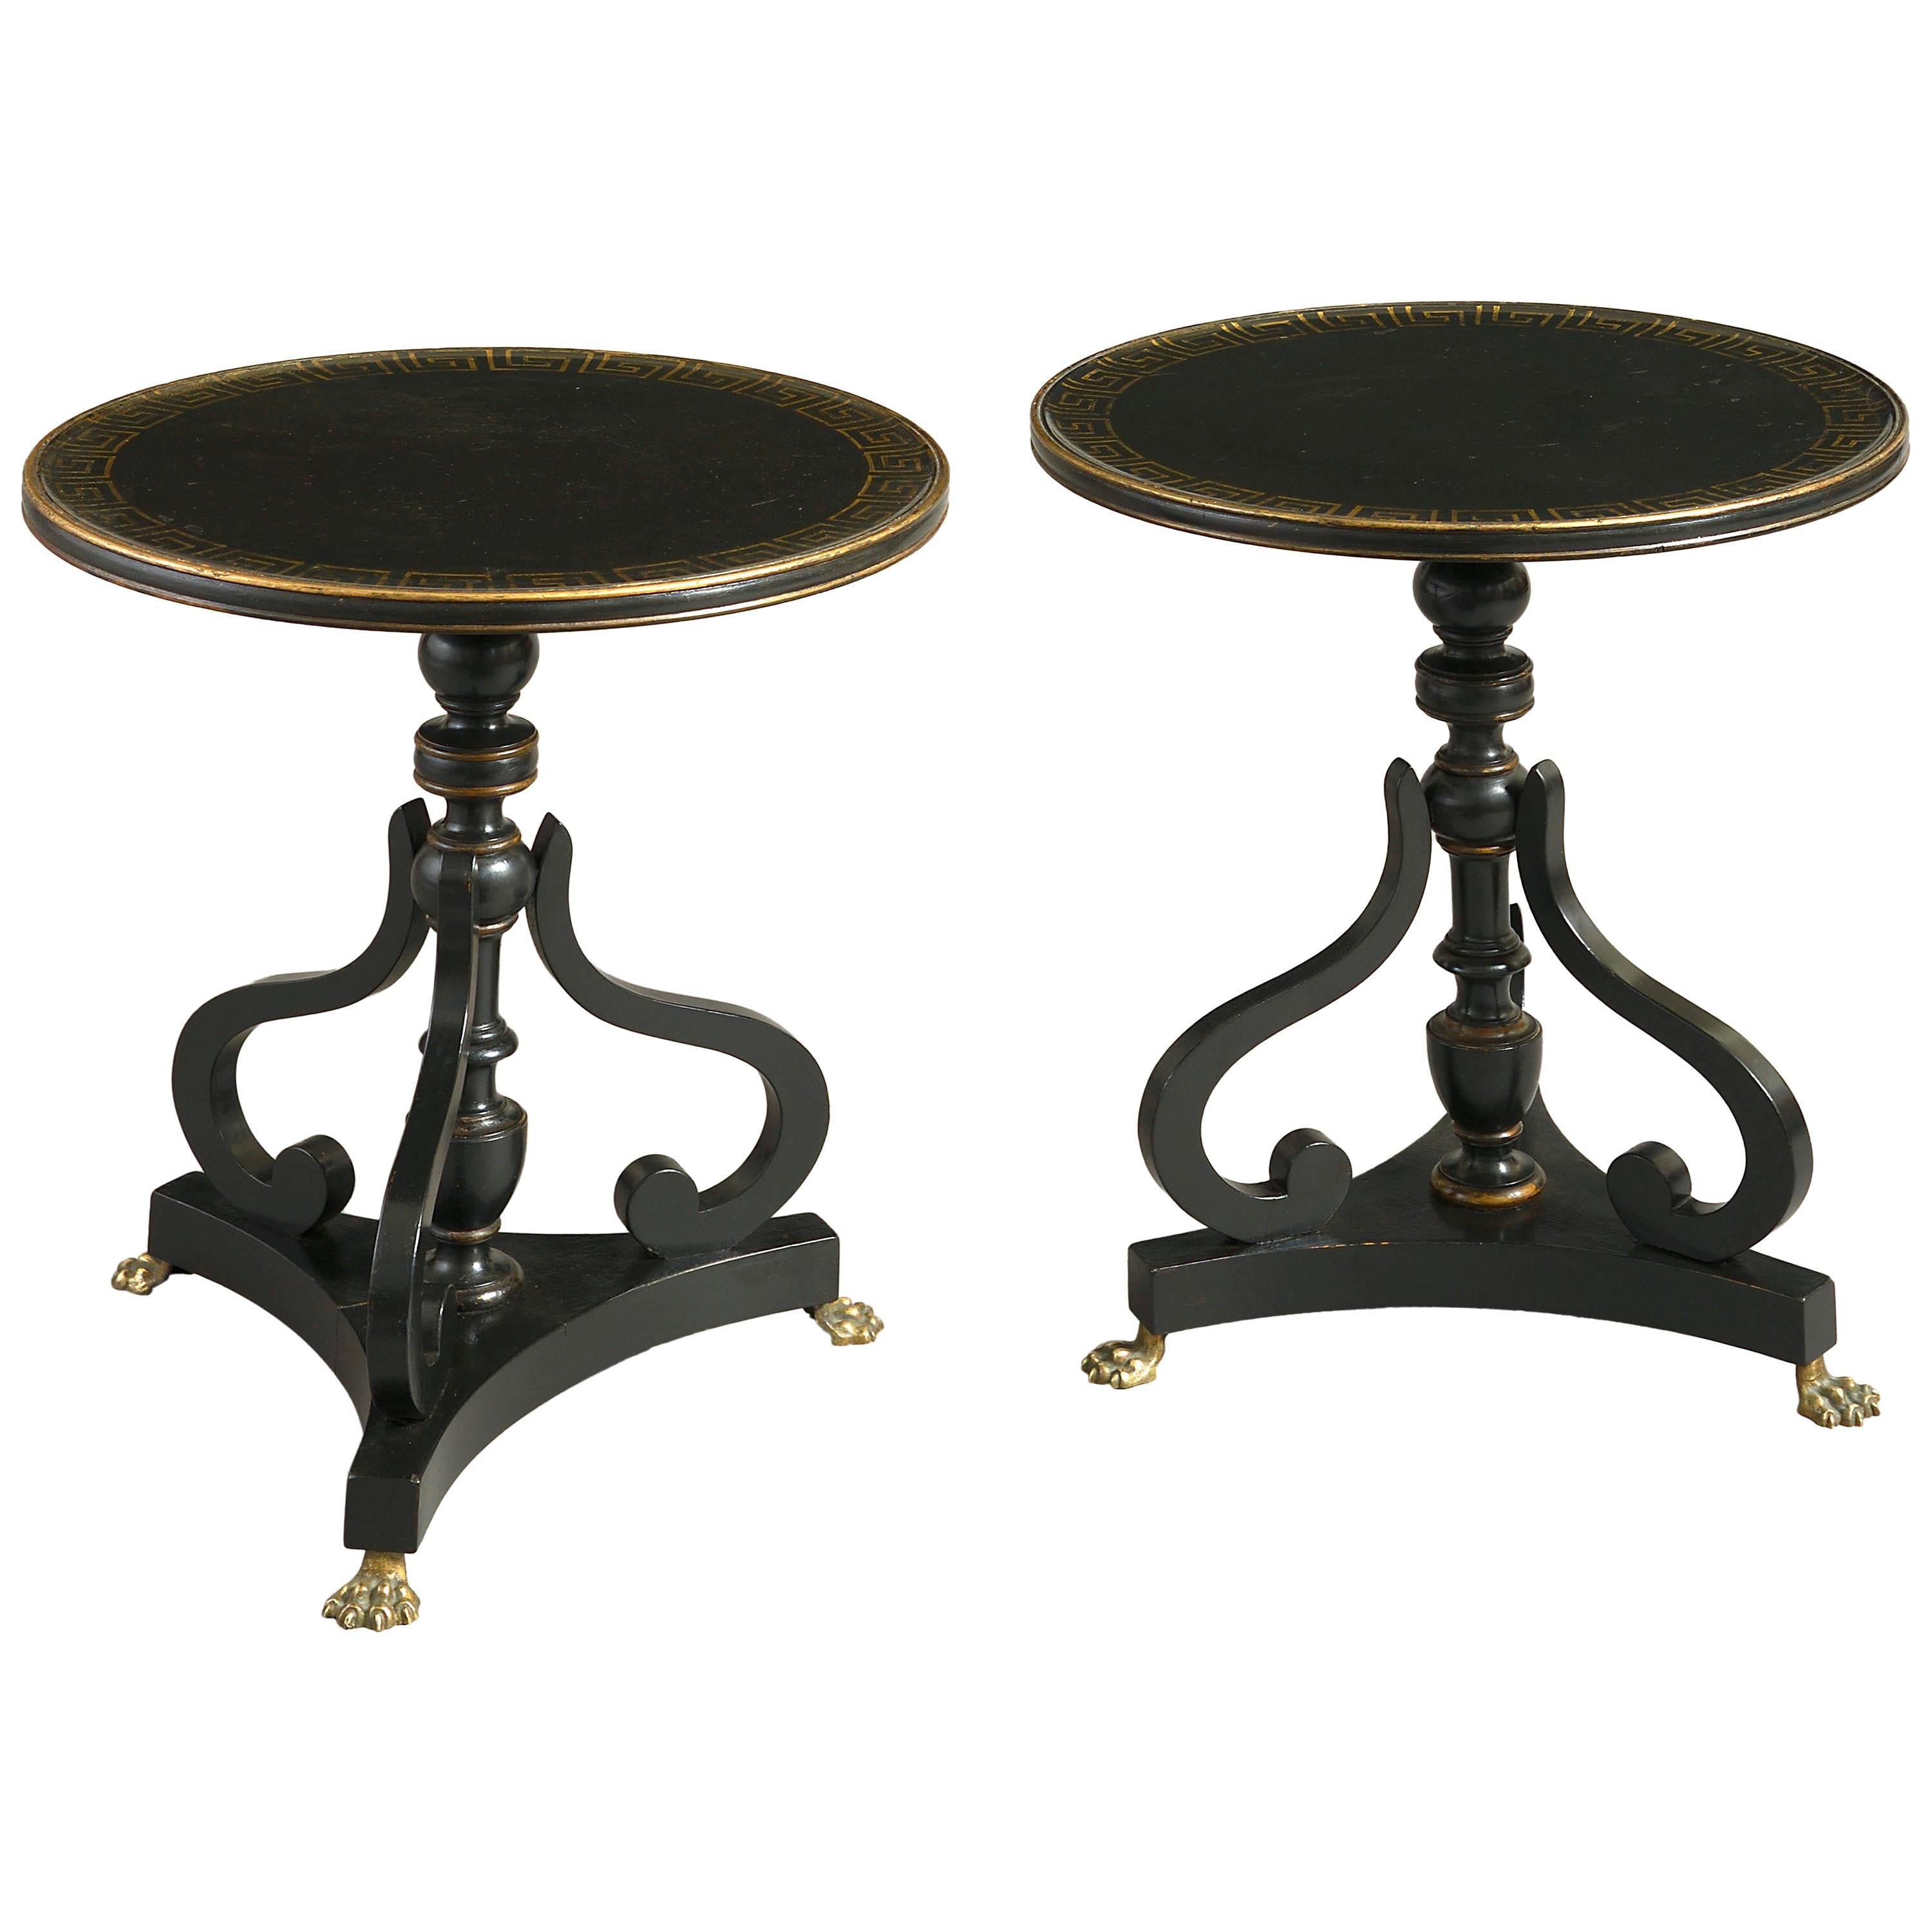 Pair of Early 20th Century Ebonized End Tables